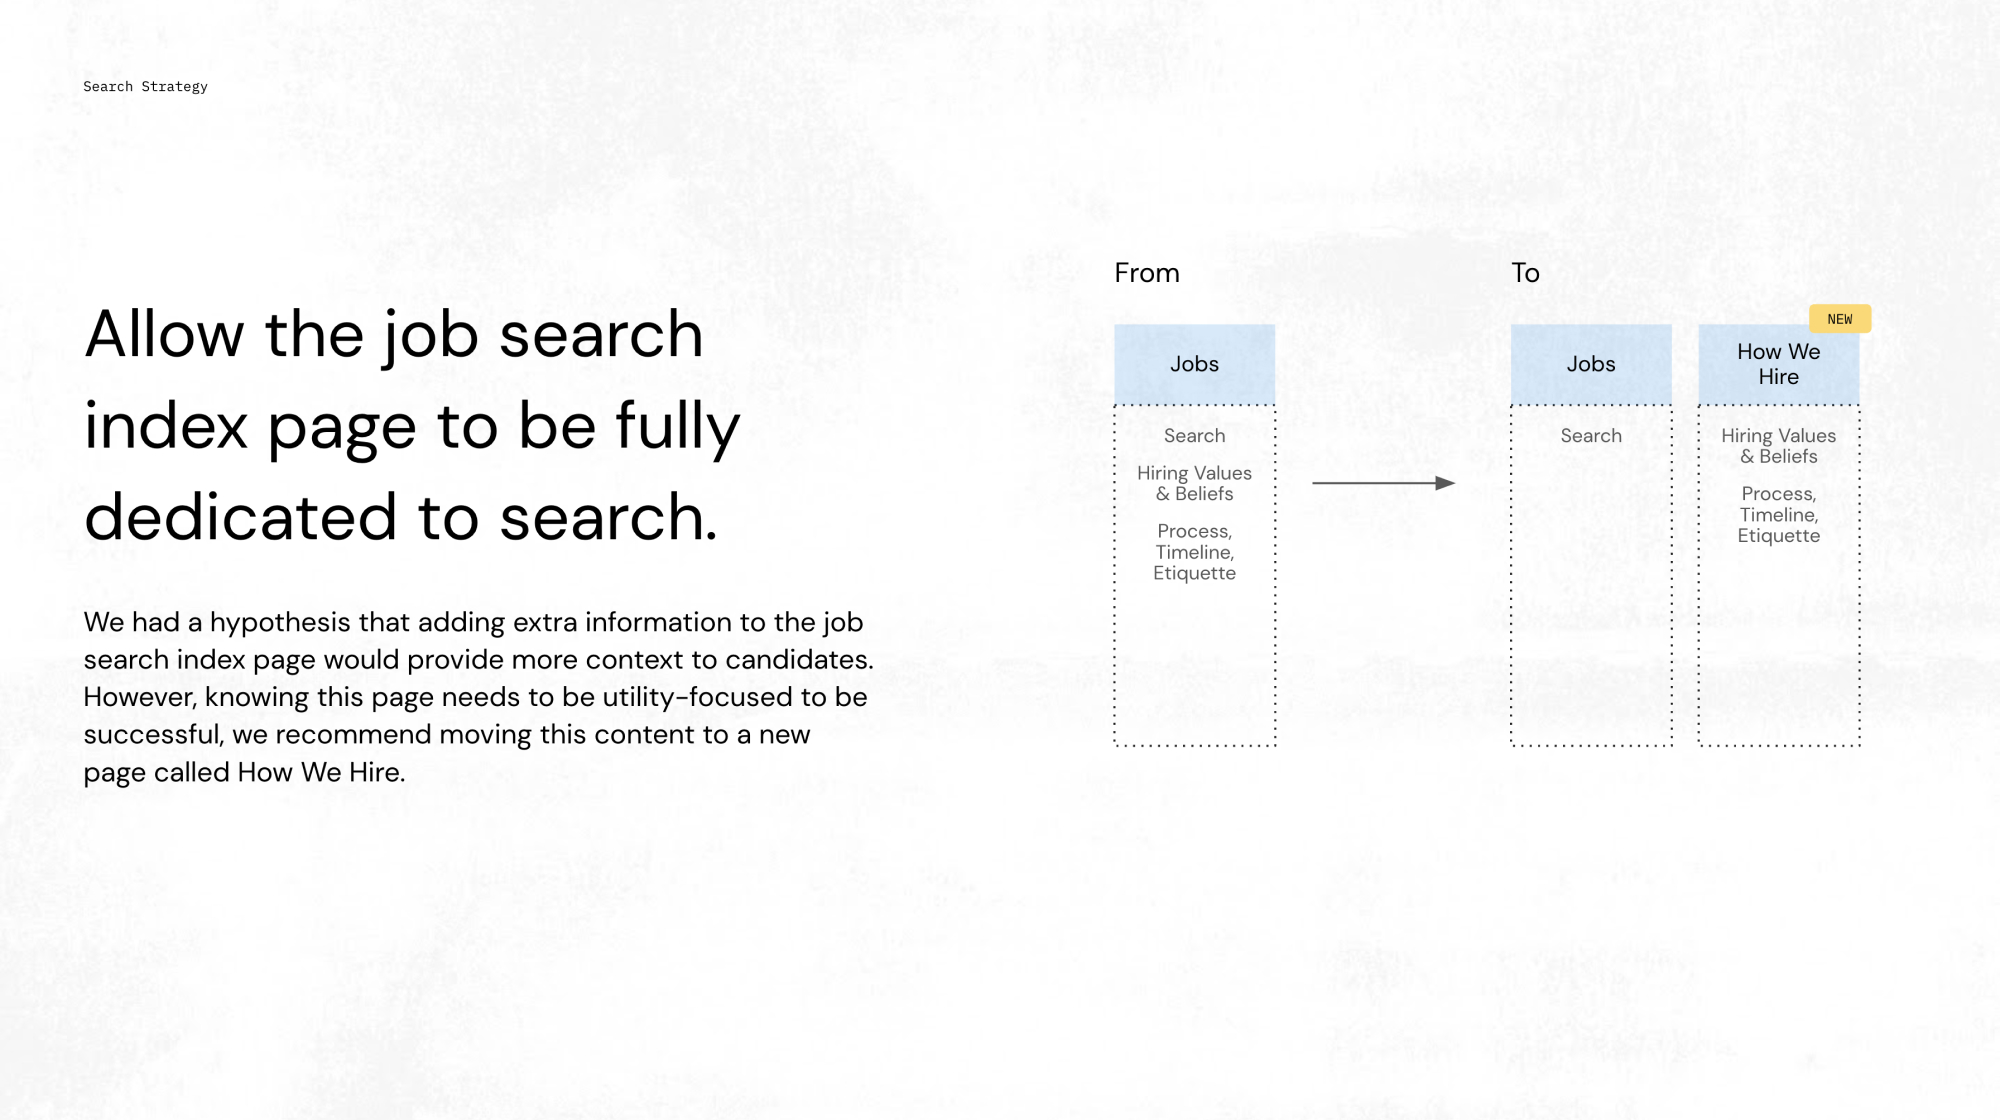 A slide outlining the search strategy for the Twitter Careers website